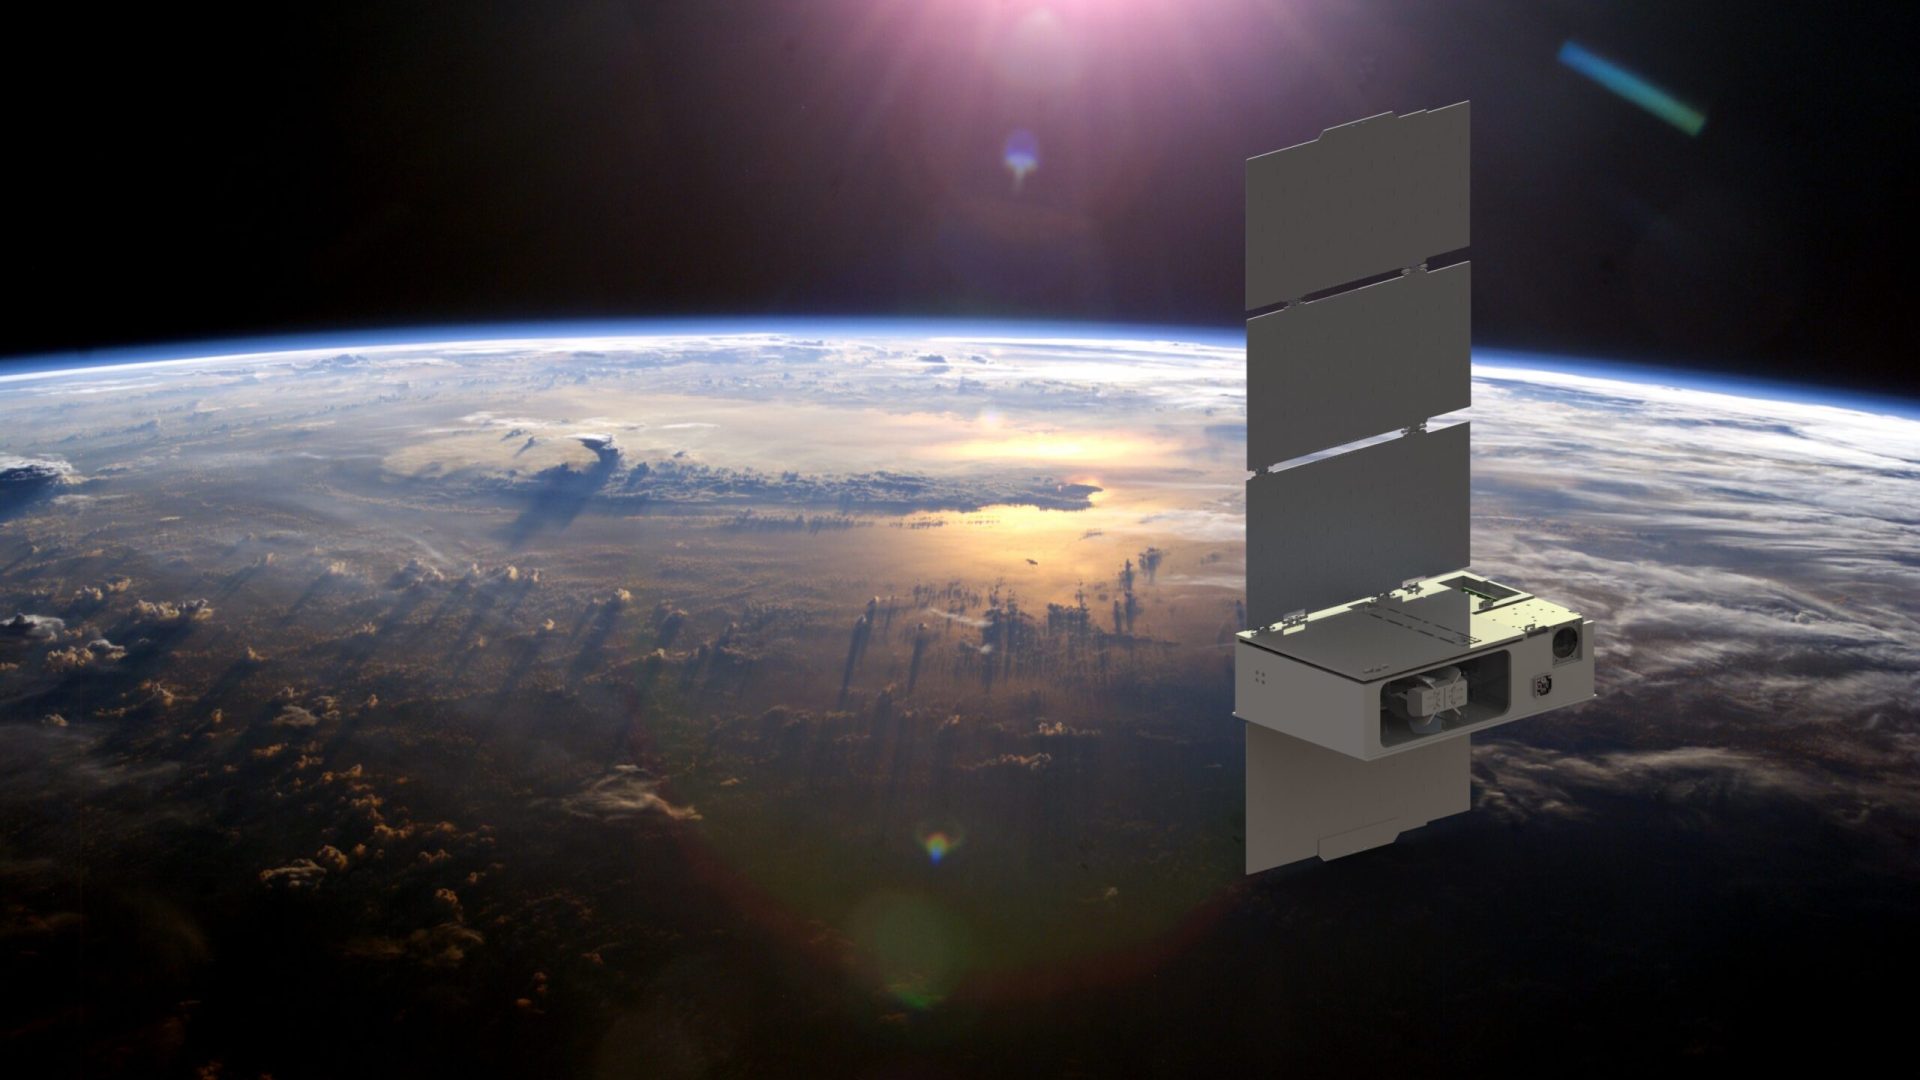 The Colorado Ultraviolet Transit Experiment (CUTE), launched in September 2021, is the first SmallSat mission funded by NASA to study a volatile class of planets known as “hot Jupiters.” Credit: LASP